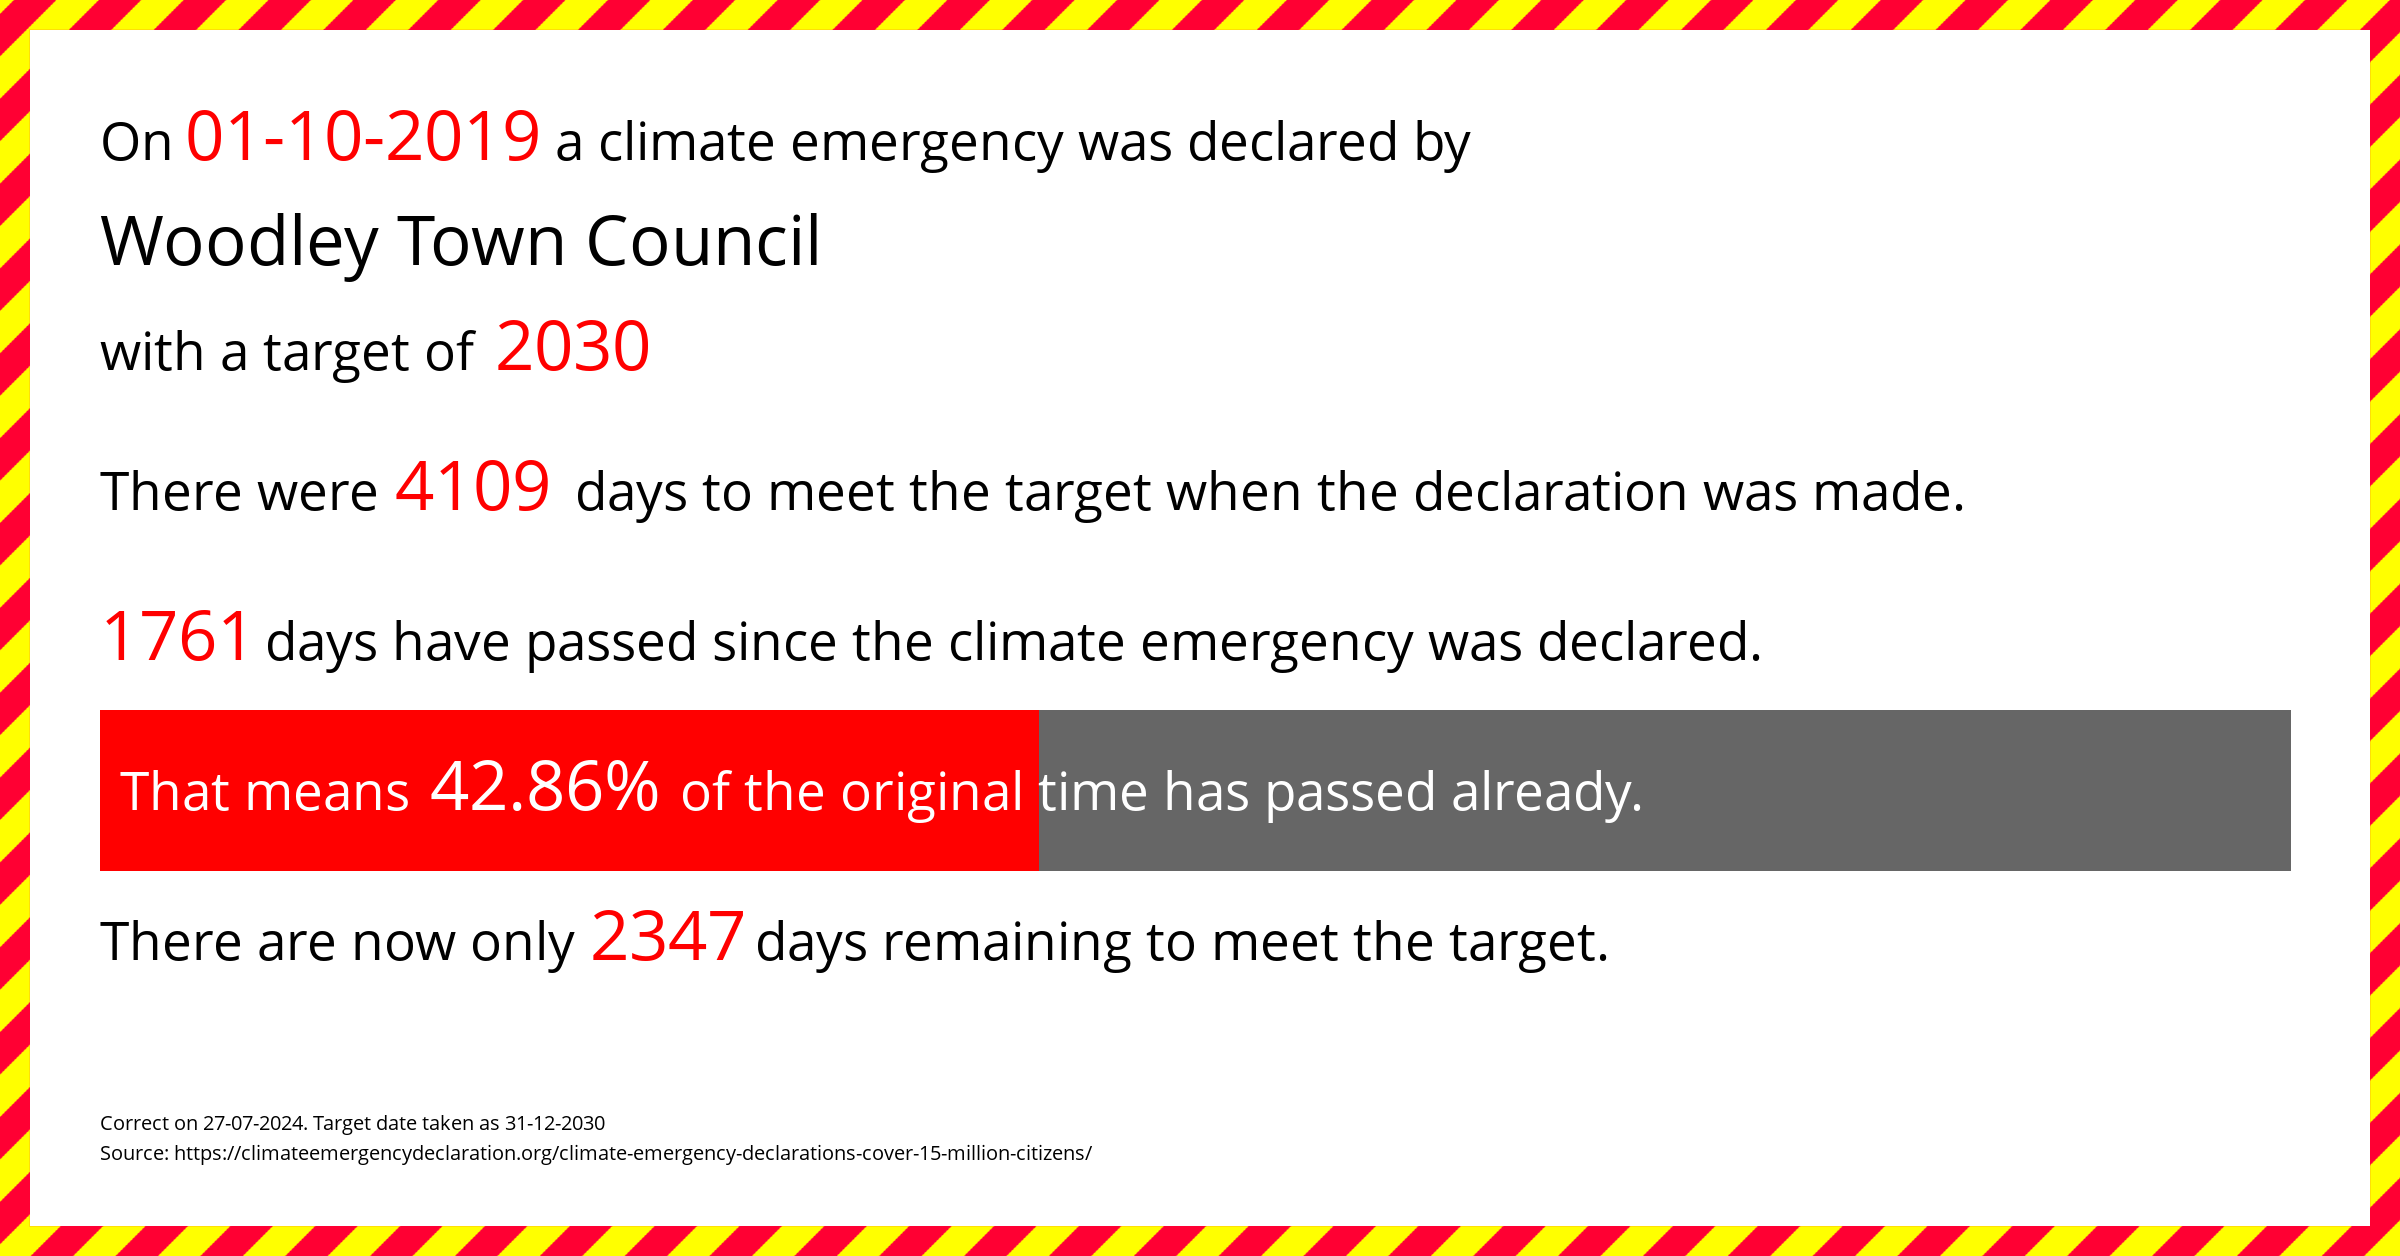 Woodley Town Council declared a Climate emergency on Tuesday 1st October 2019, with a target of 2030.